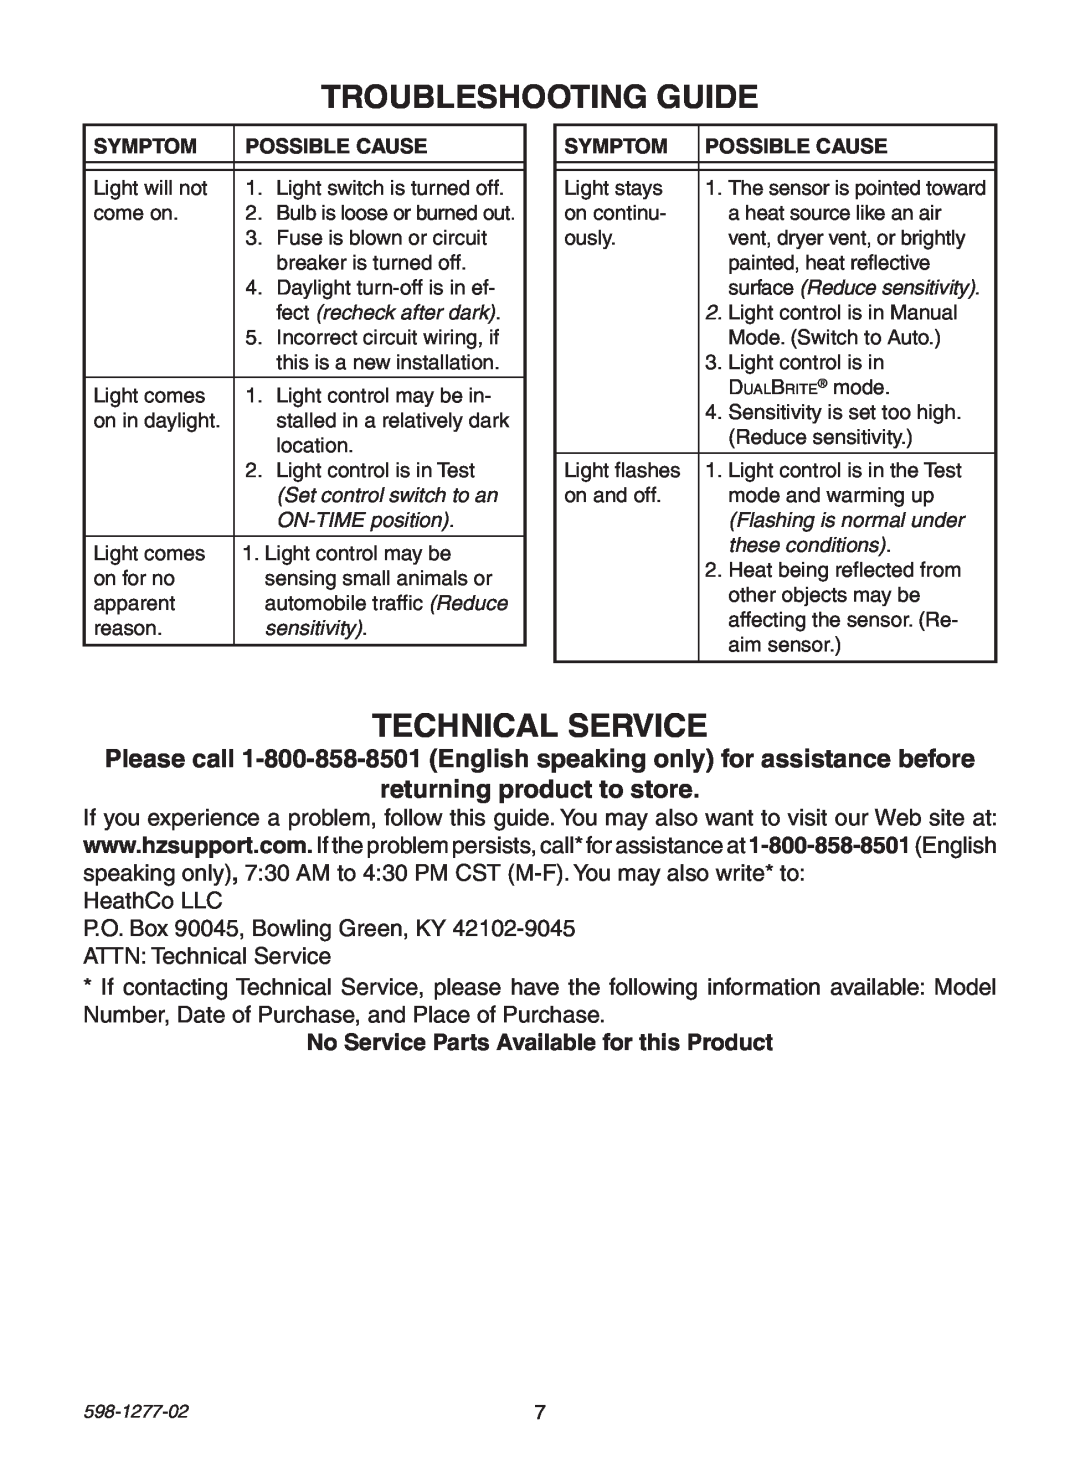 Heath Zenith SL-4290 Series Troubleshooting Guide, Technical Service, No Service Parts Available for this Product, Symptom 